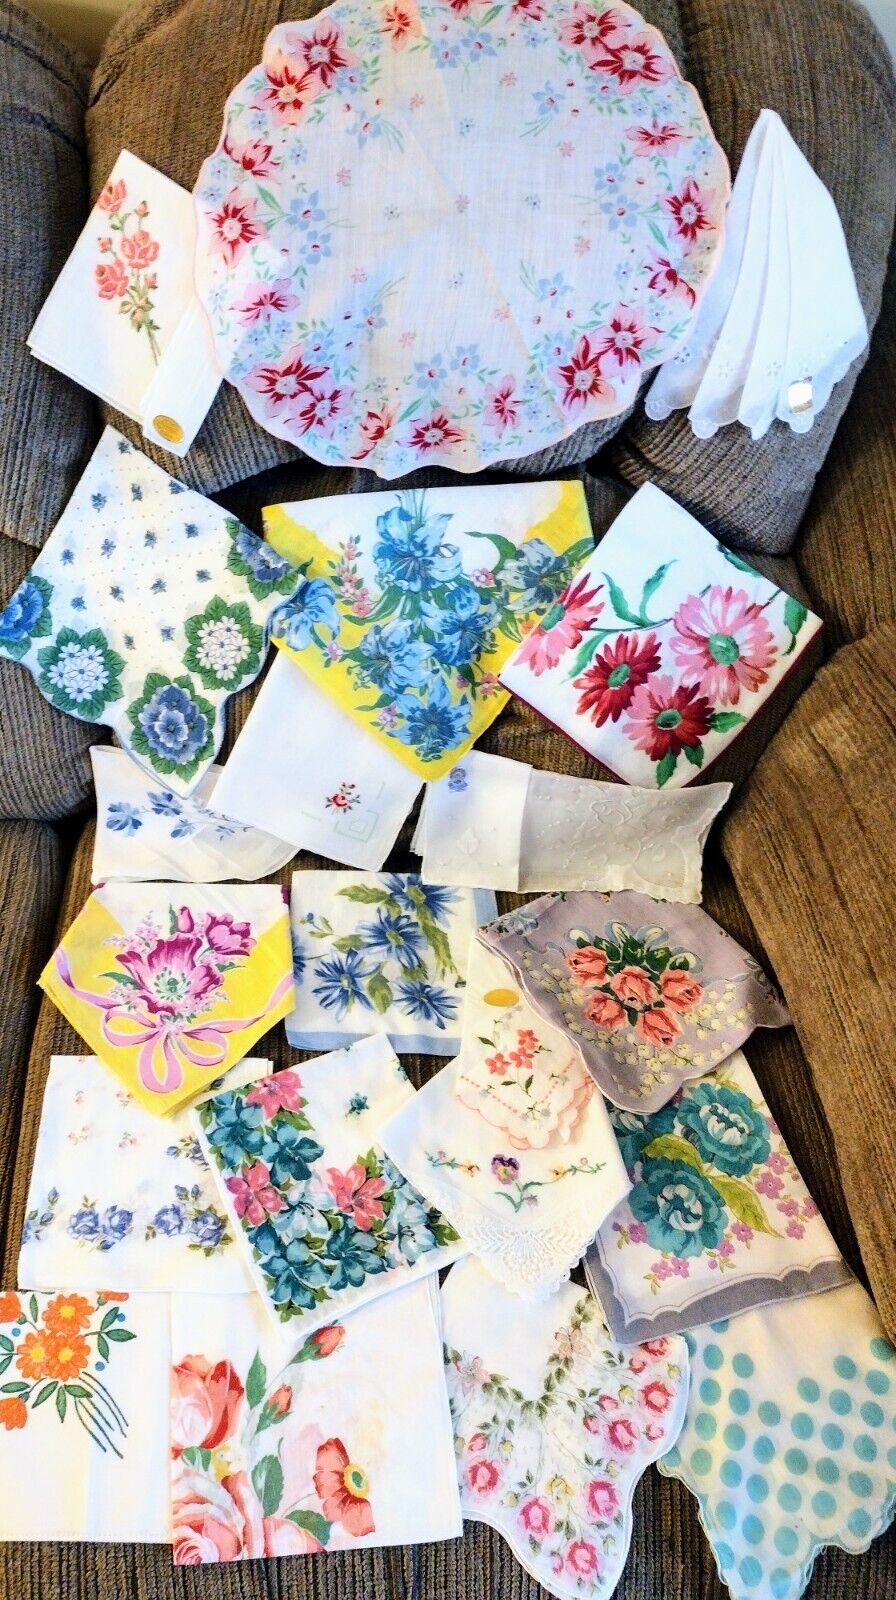 21 VINTAGE MIX HANKIES Lot FLORALS Embroidery ROUND Scalloped MADEIRA EXCELLENT